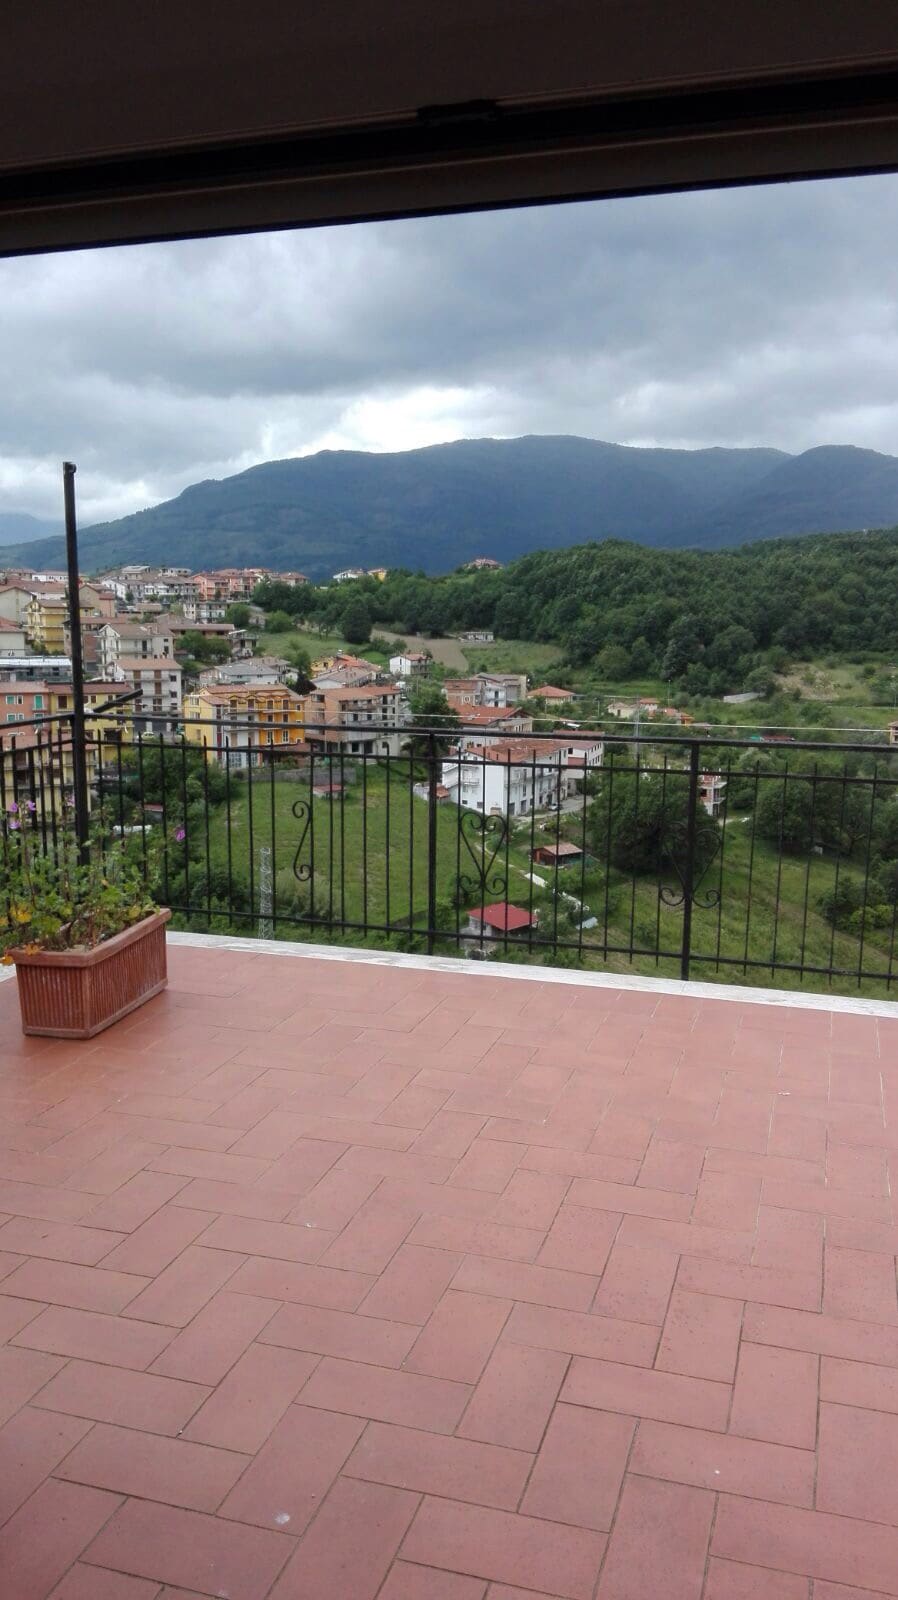 Caselle in Pittari Vacation Rentals & Homes - Campania, Italy | Airbnb